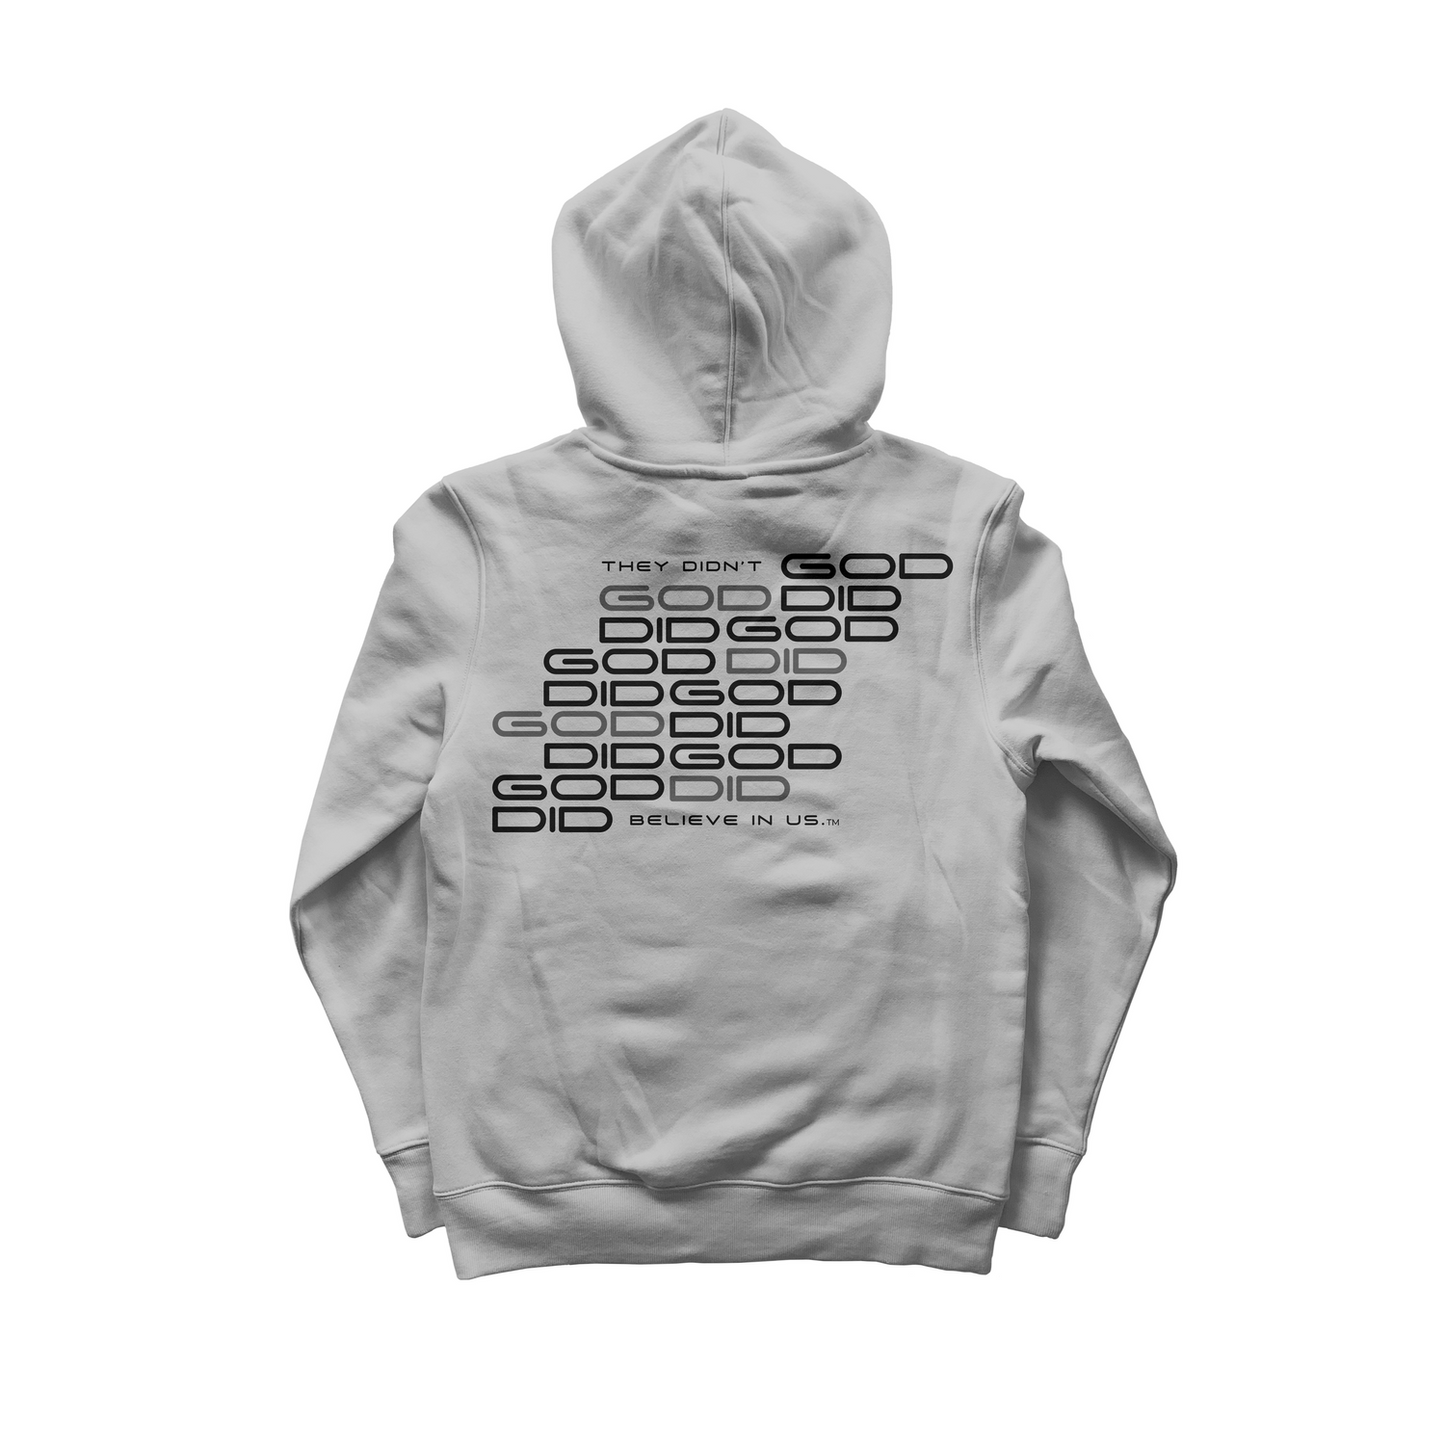 They Didn't Believe In Us. GOD DID. HOODIE